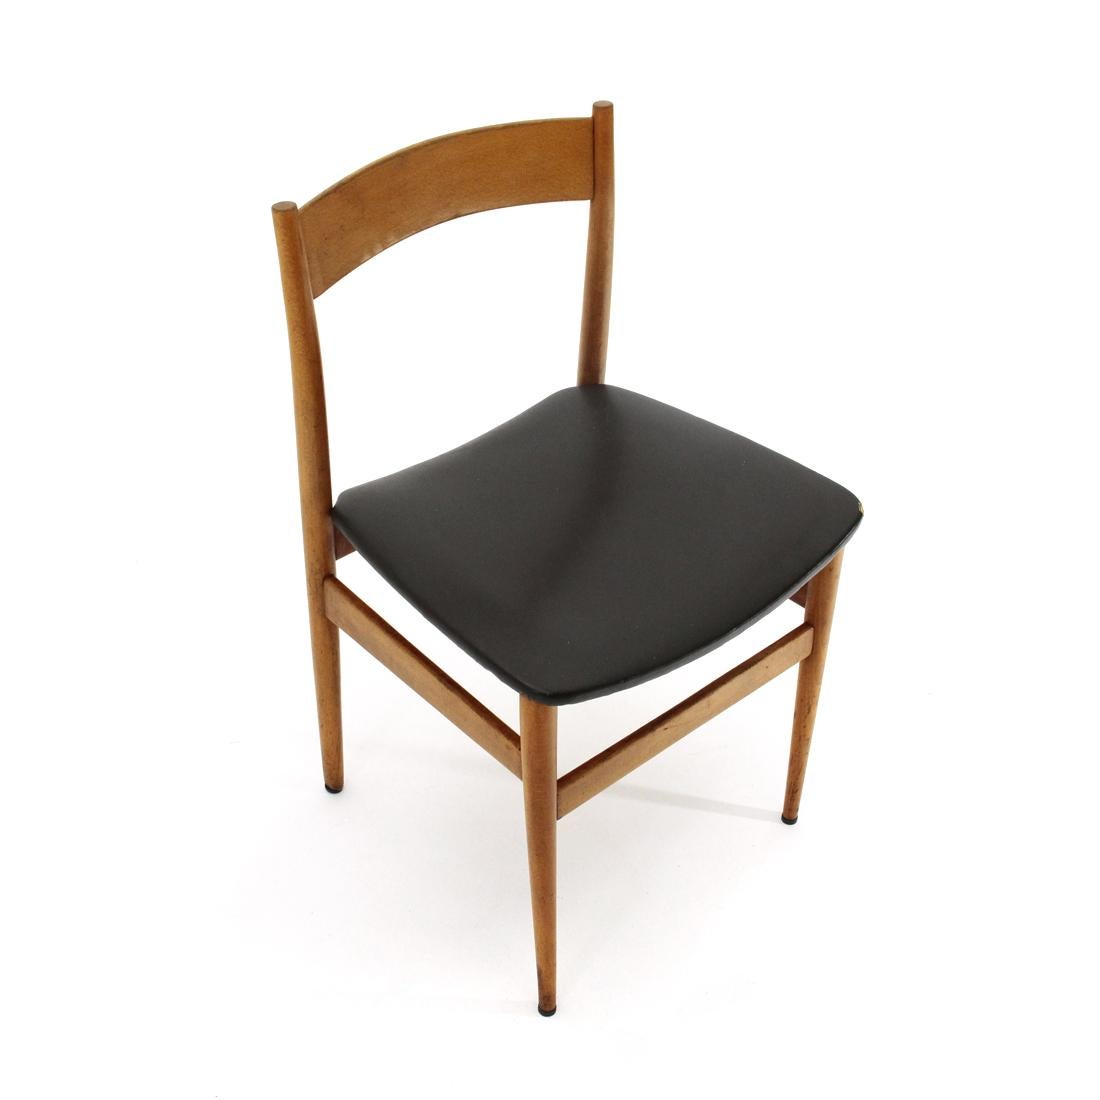 Mid-Century Modern Wooden Chair with Upholstered Seat, 1950s For Sale